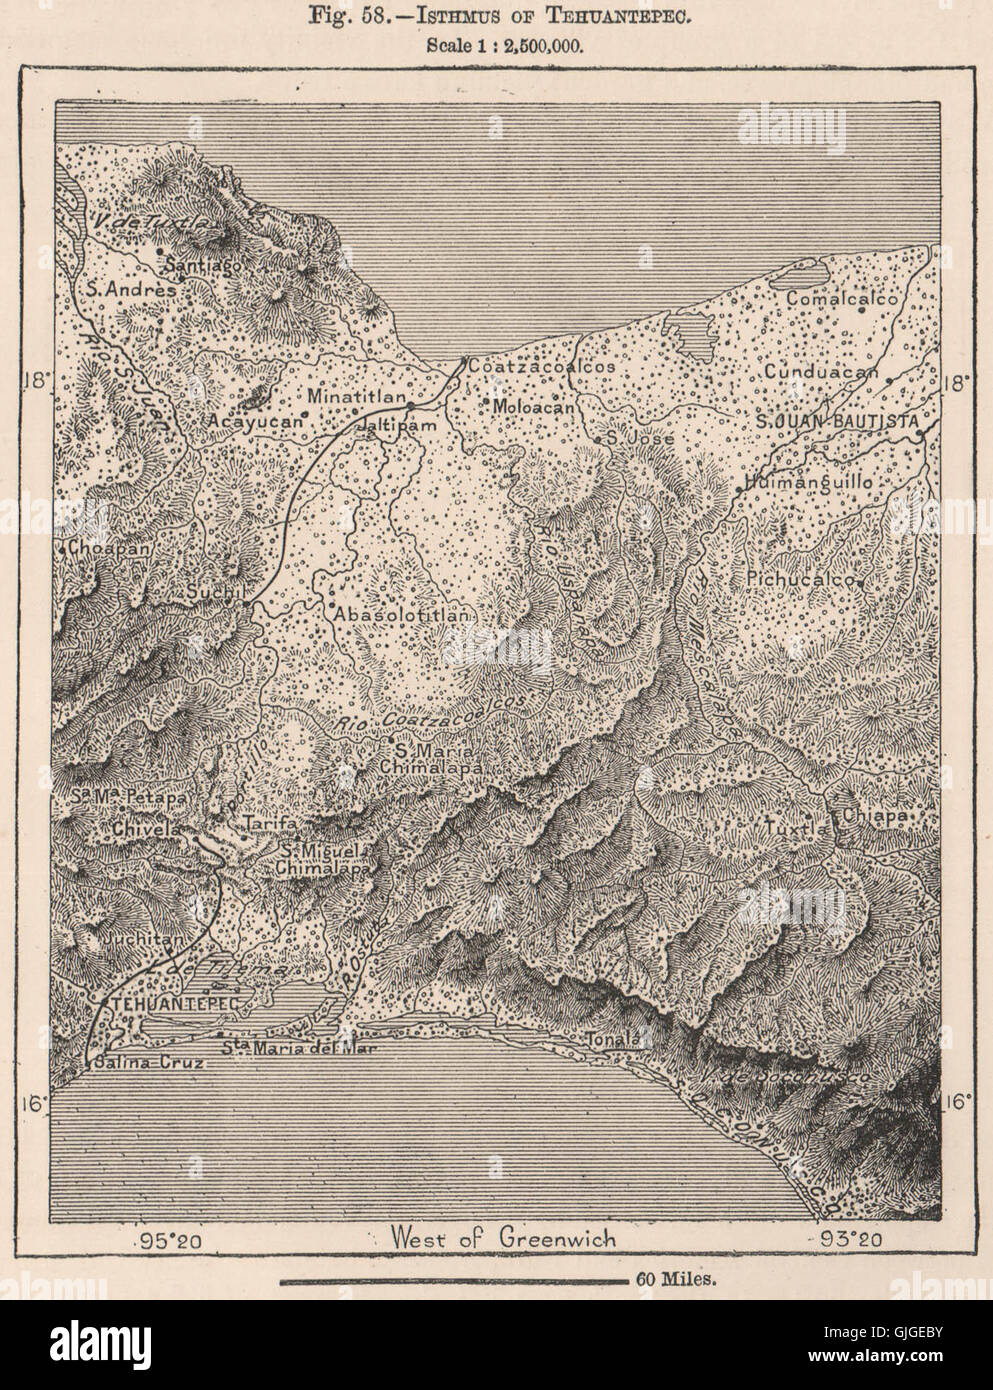 Isthmus of Tehuantepec. Mexico, 1885 antique map Stock Photo